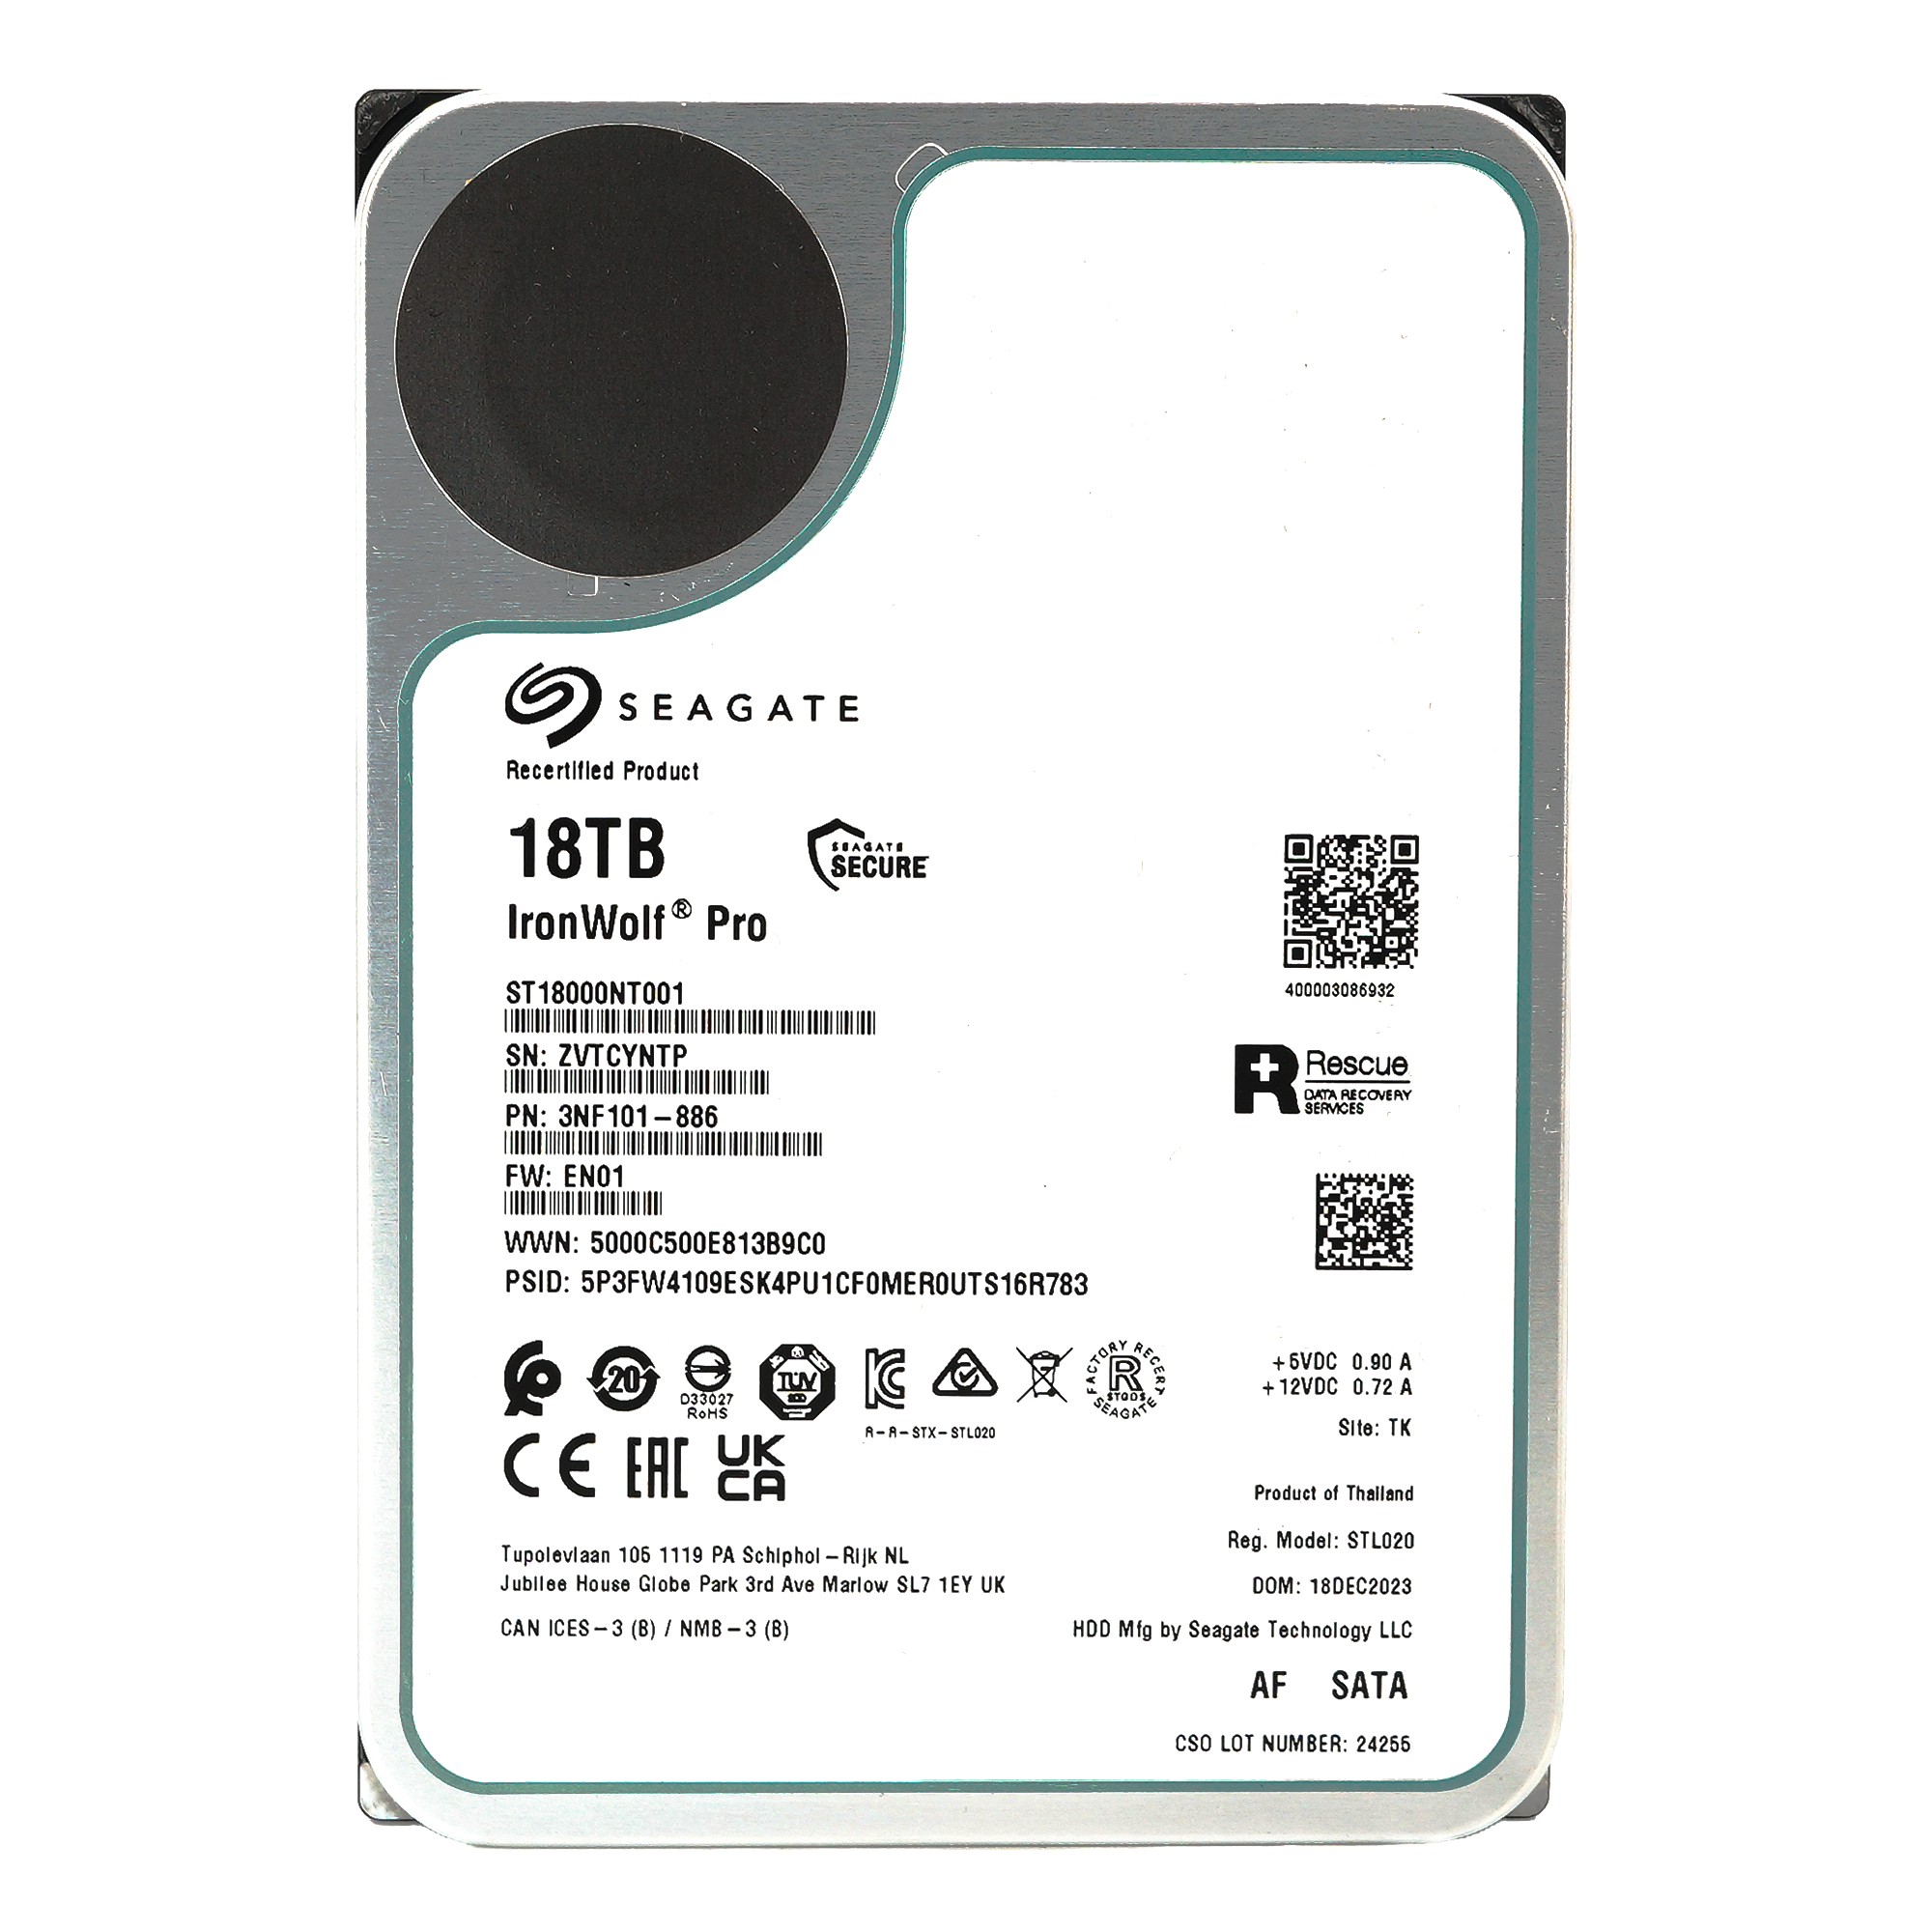 Seagate IronWolf Pro ST18000NT001 18TB 7.2K RPM SATA 6Gb/s NAS 3.5in Recertified Hard Drive - Front View